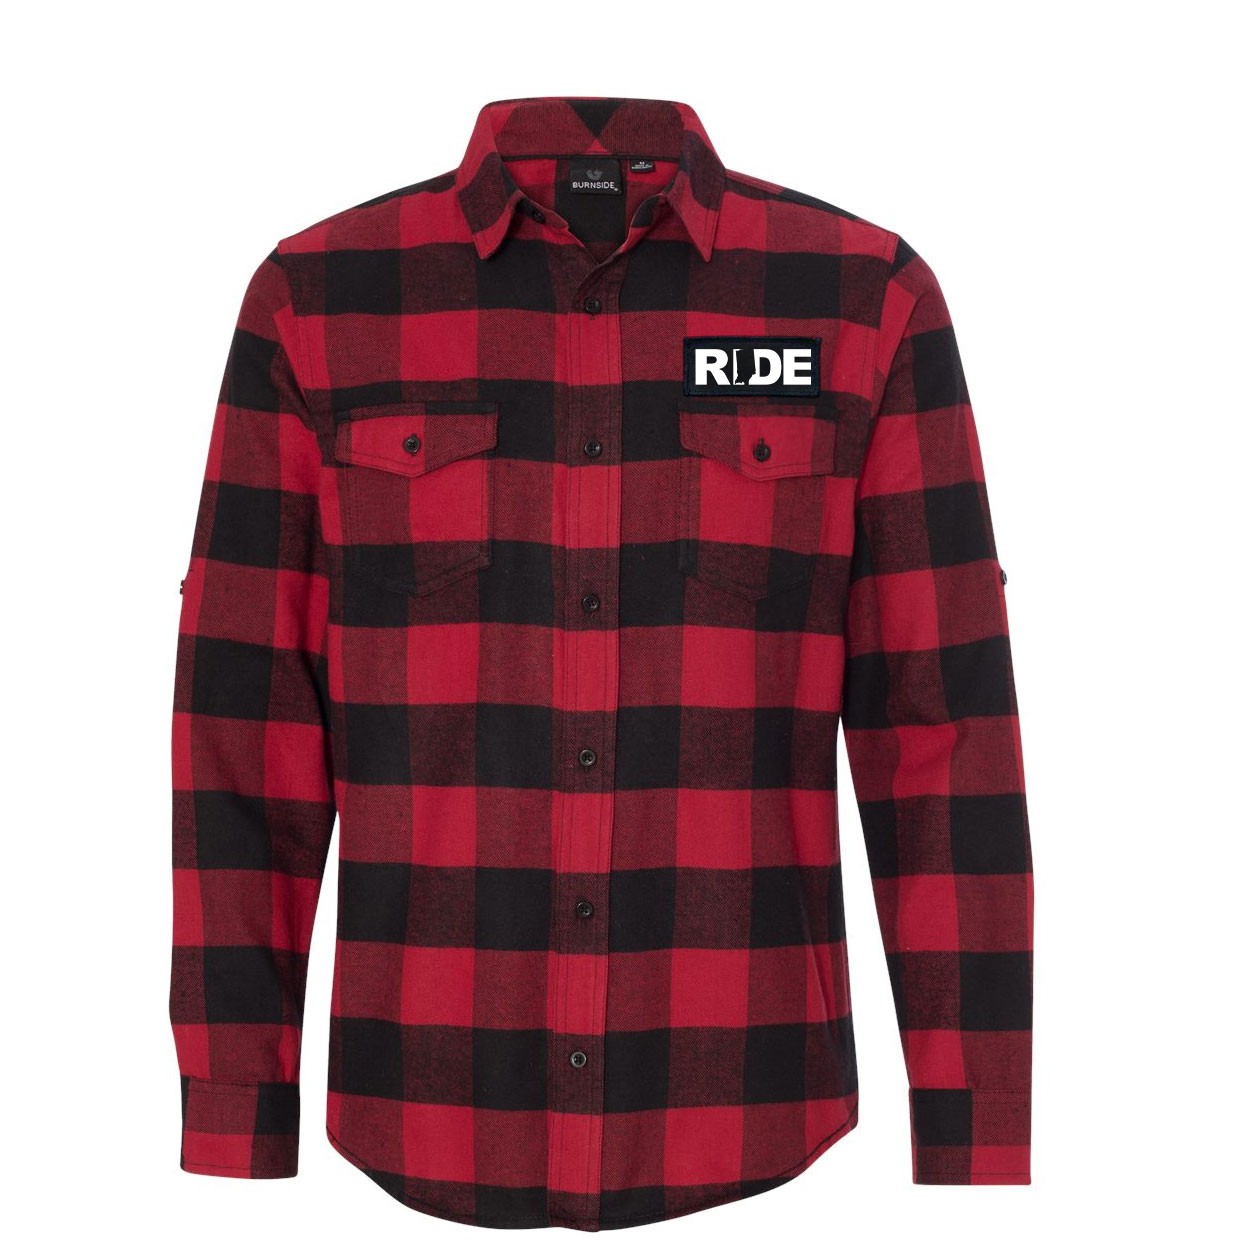 Ride Indiana Classic Unisex Long Sleeve Woven Patch Flannel Shirt Red/Black Buffalo (White Logo)